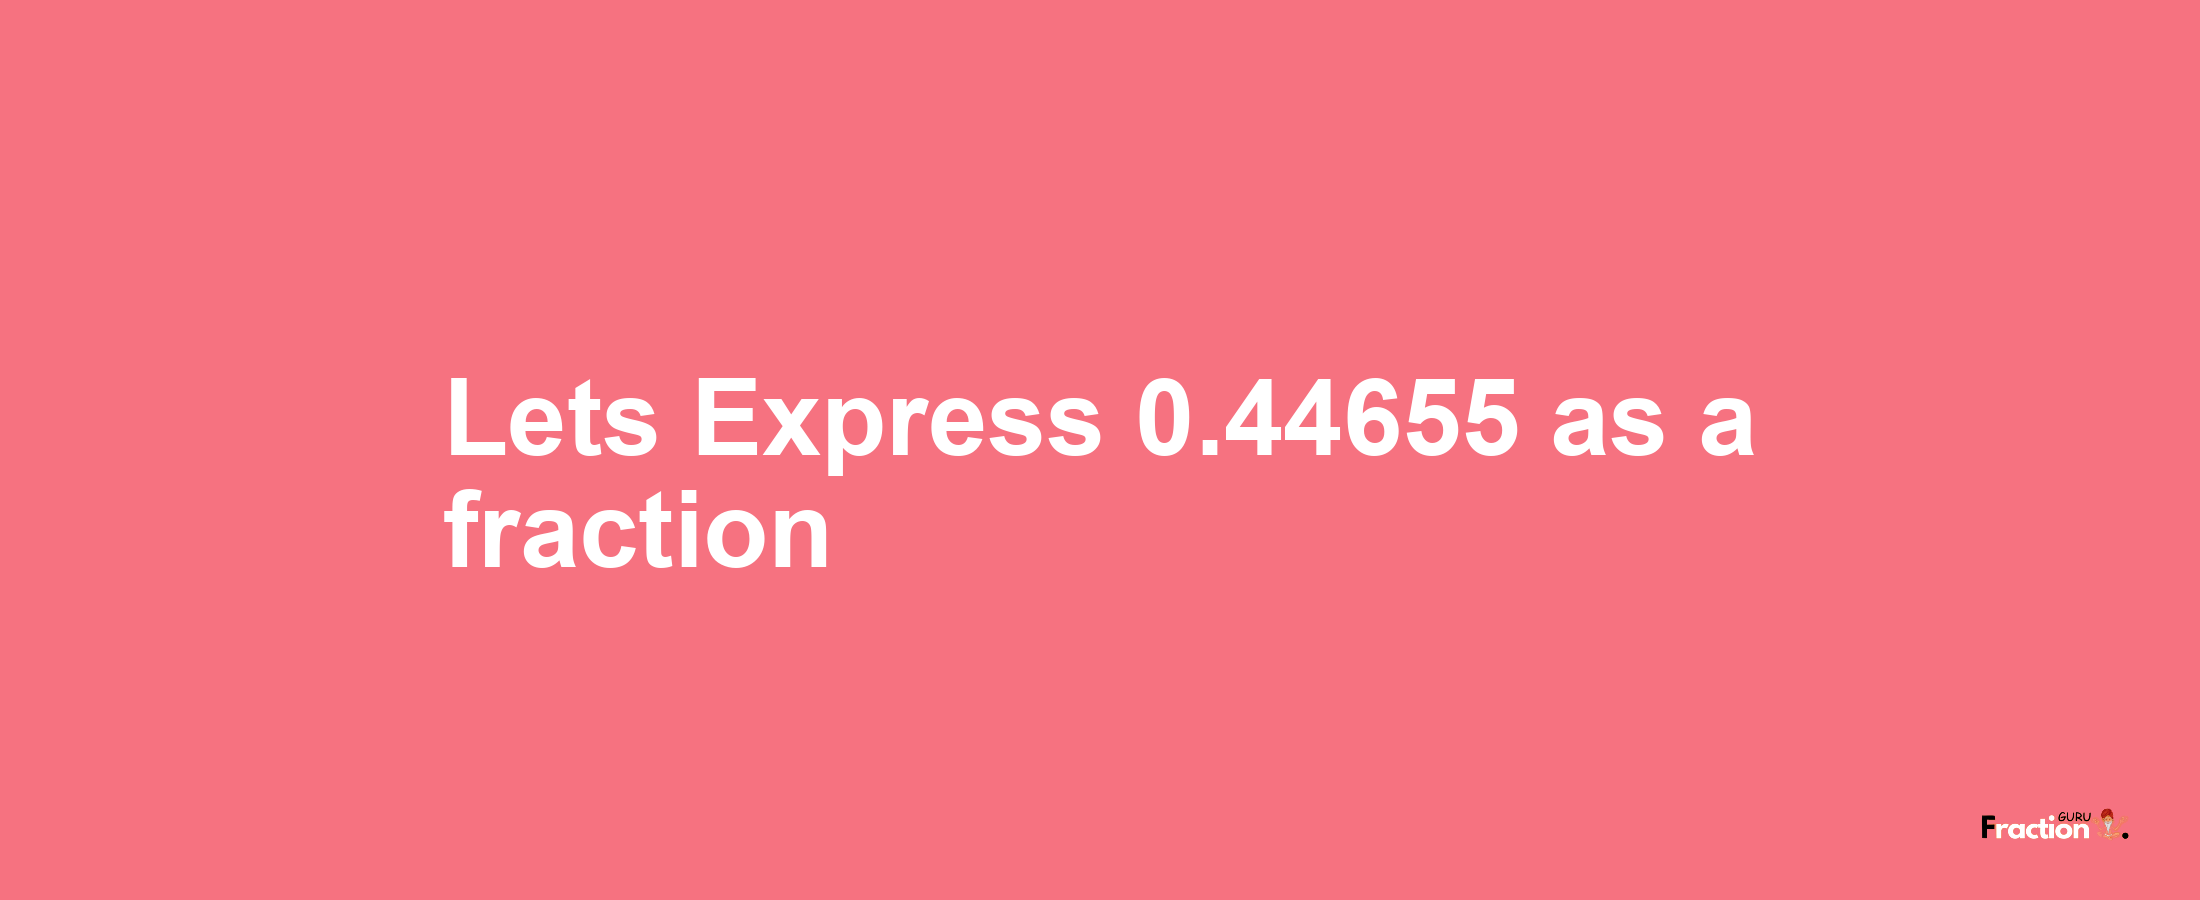 Lets Express 0.44655 as afraction